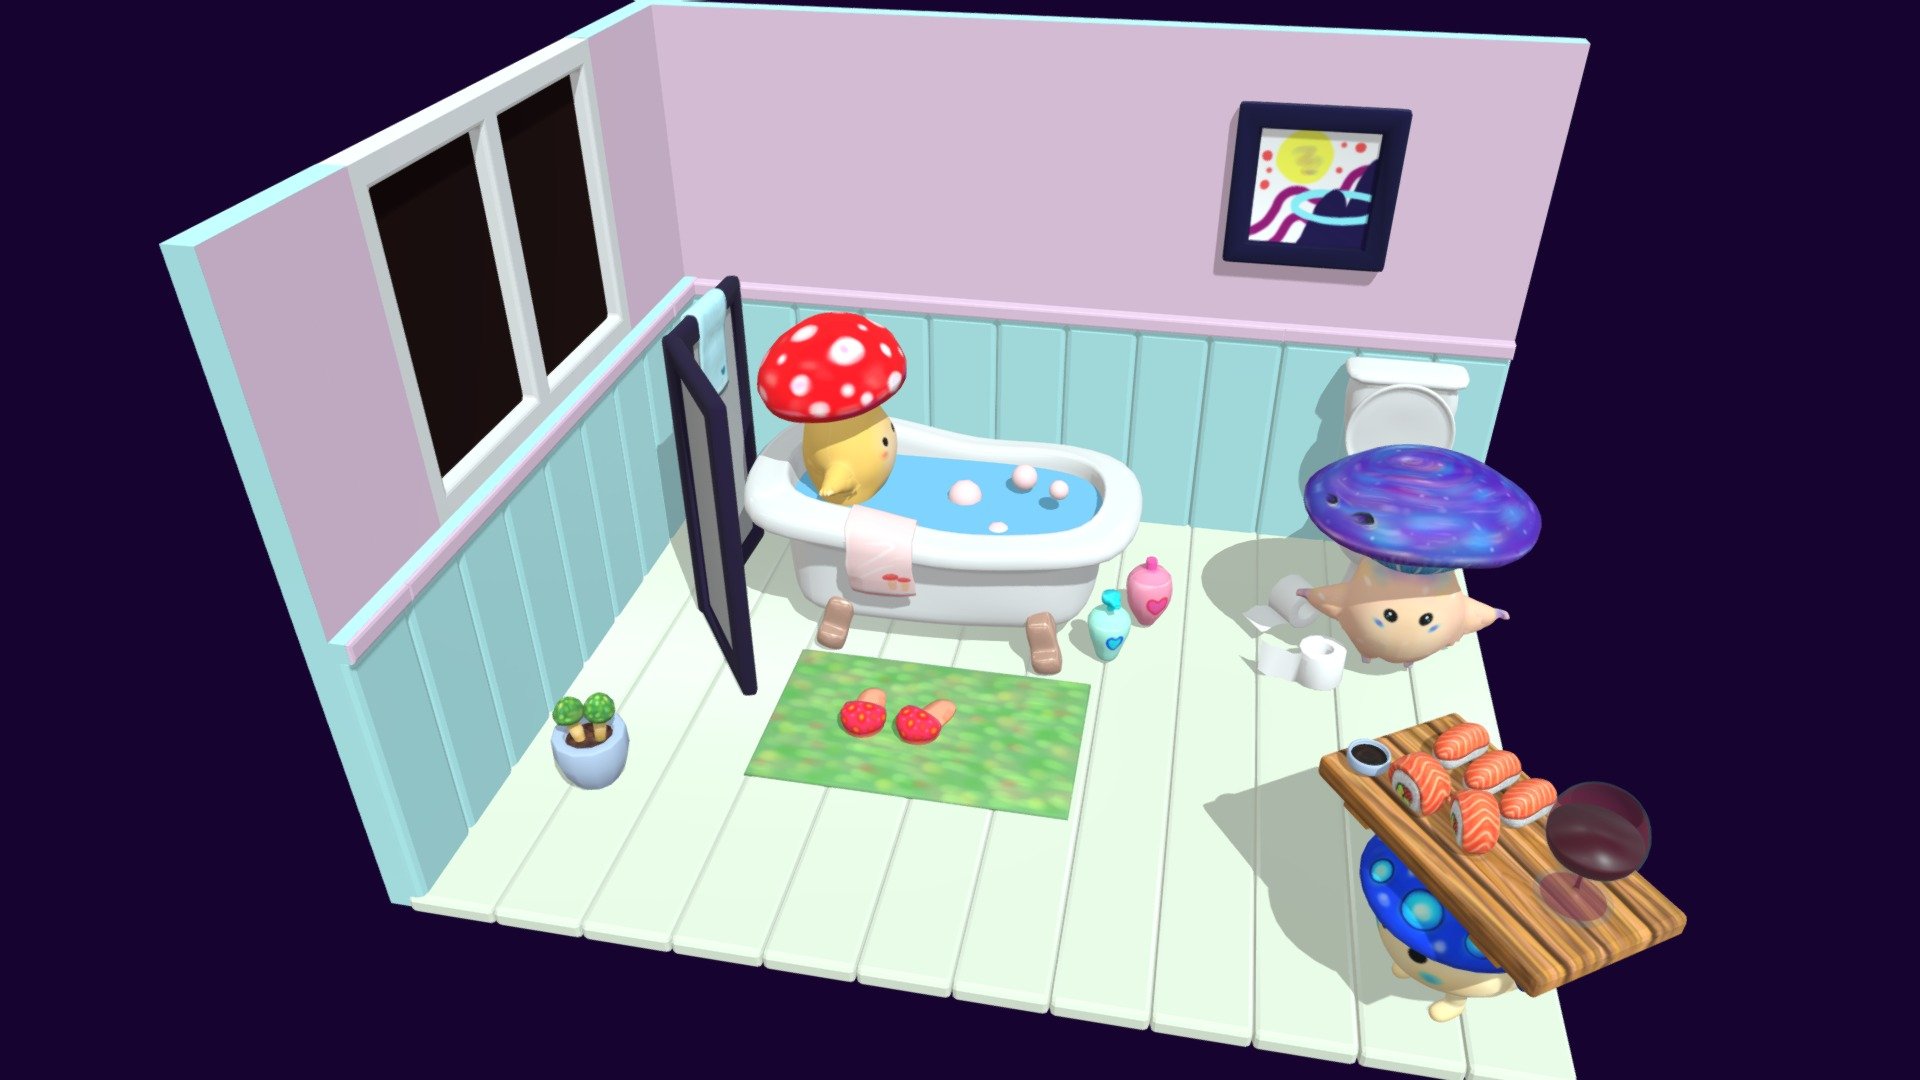 These Adorable Mushroom Fairies are doing their own businesse. The red mushroom takes a hot bath, the Purple mushroom uses toliet, and the Alfredo mushromm serves delicious sushi set.  What is your favorite activity in the Washroom?
They are hand-painted textures and they are Rigged 3d model